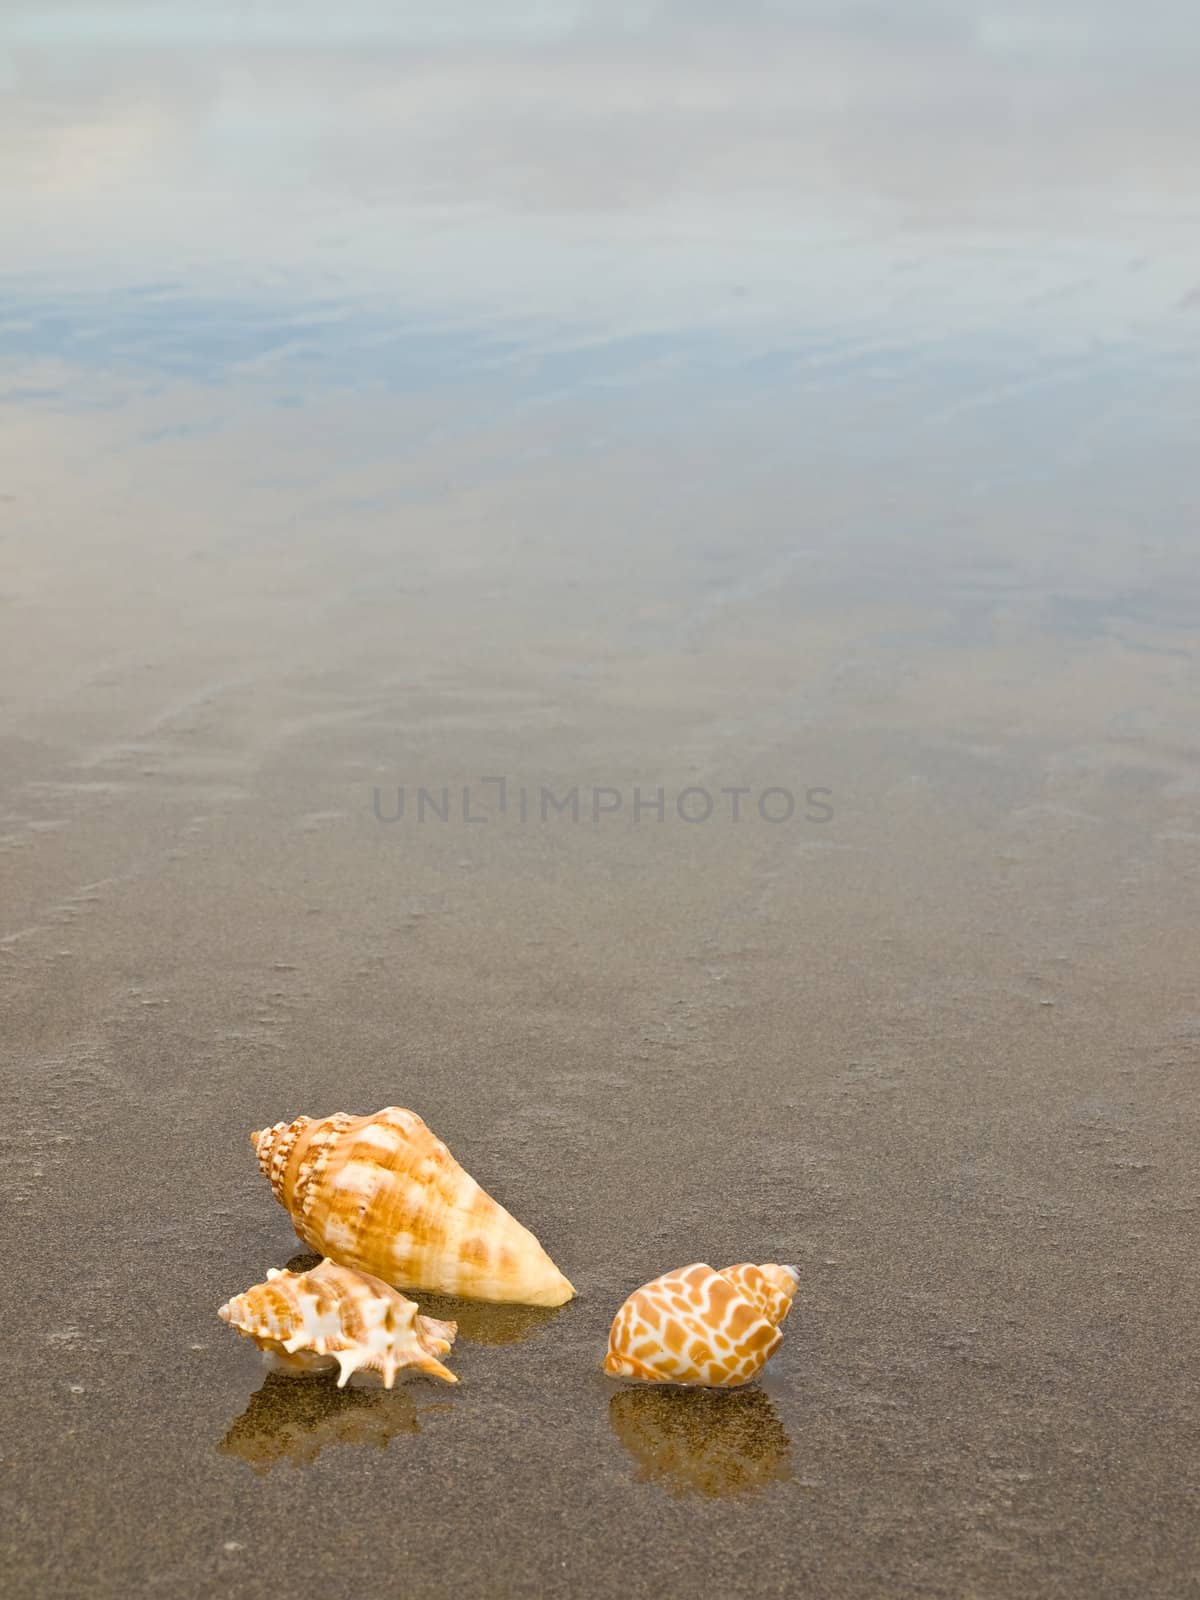 Scallop and Conch Shells on a Wet Sandy Beach by Frankljunior